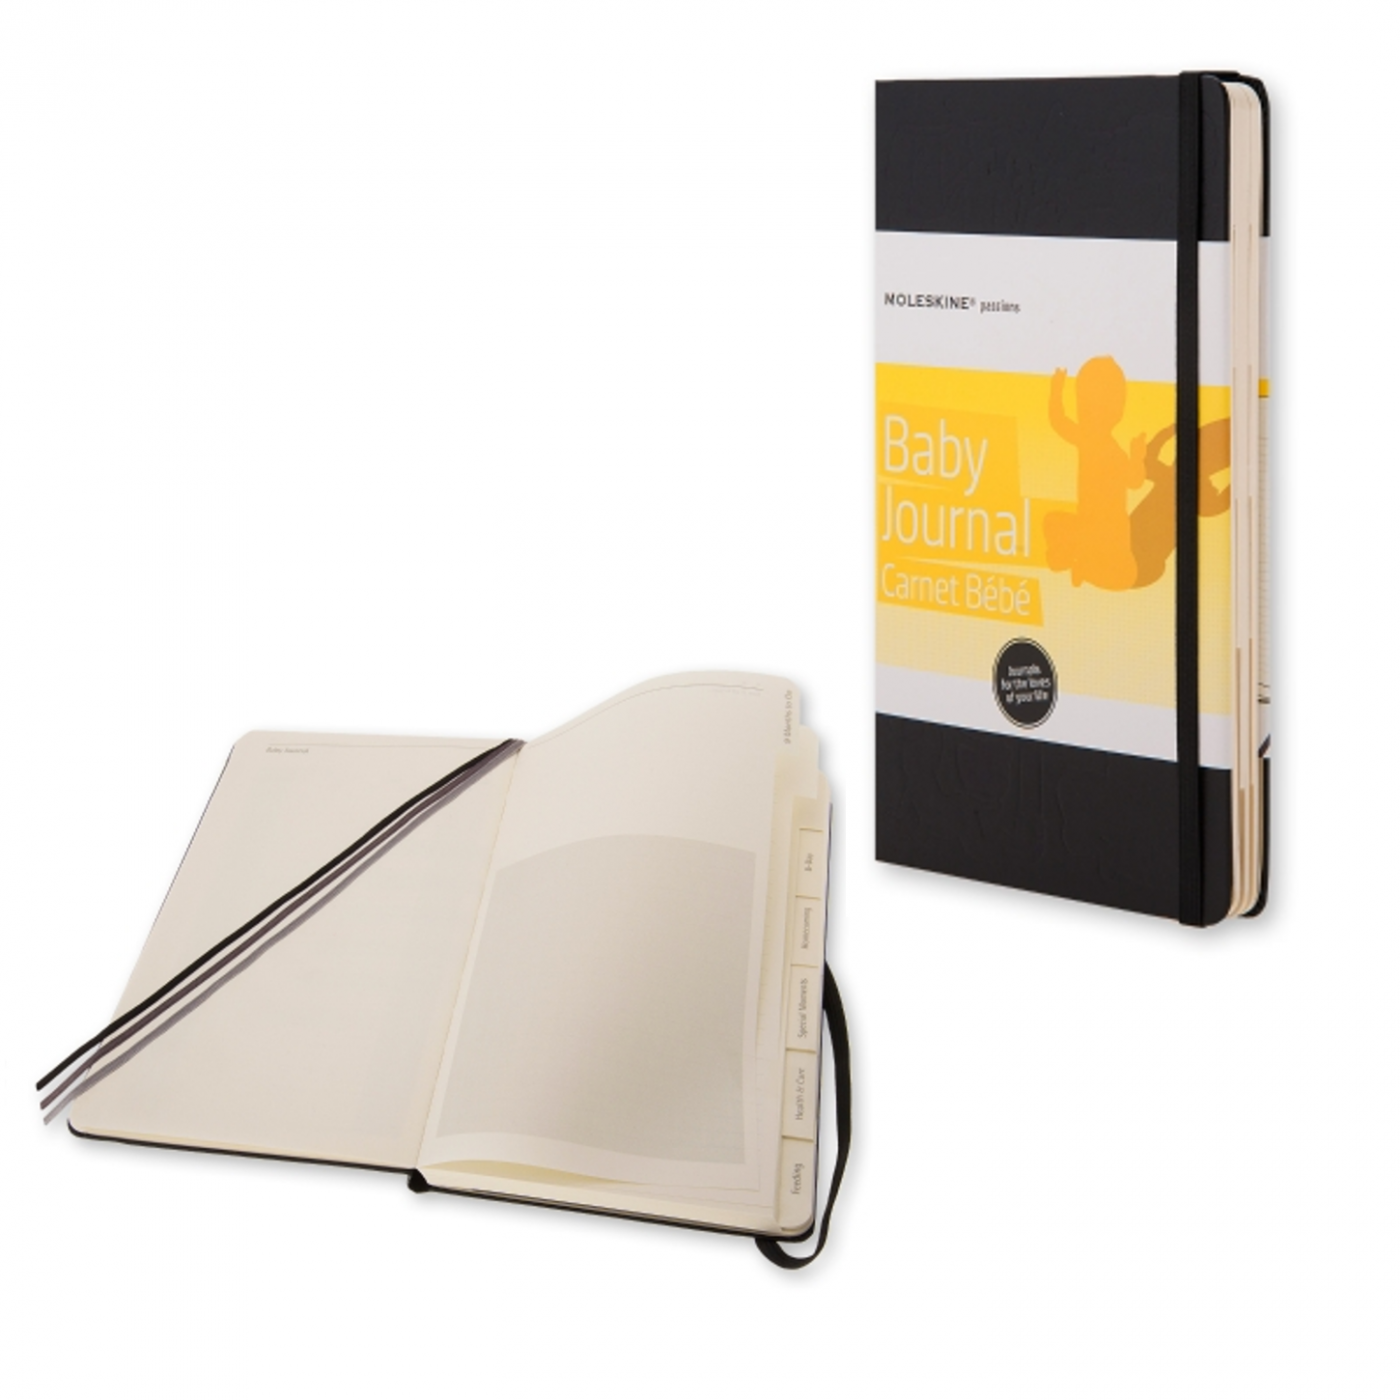 MOLESKINE taccuino passion journal Baby, large 13x21